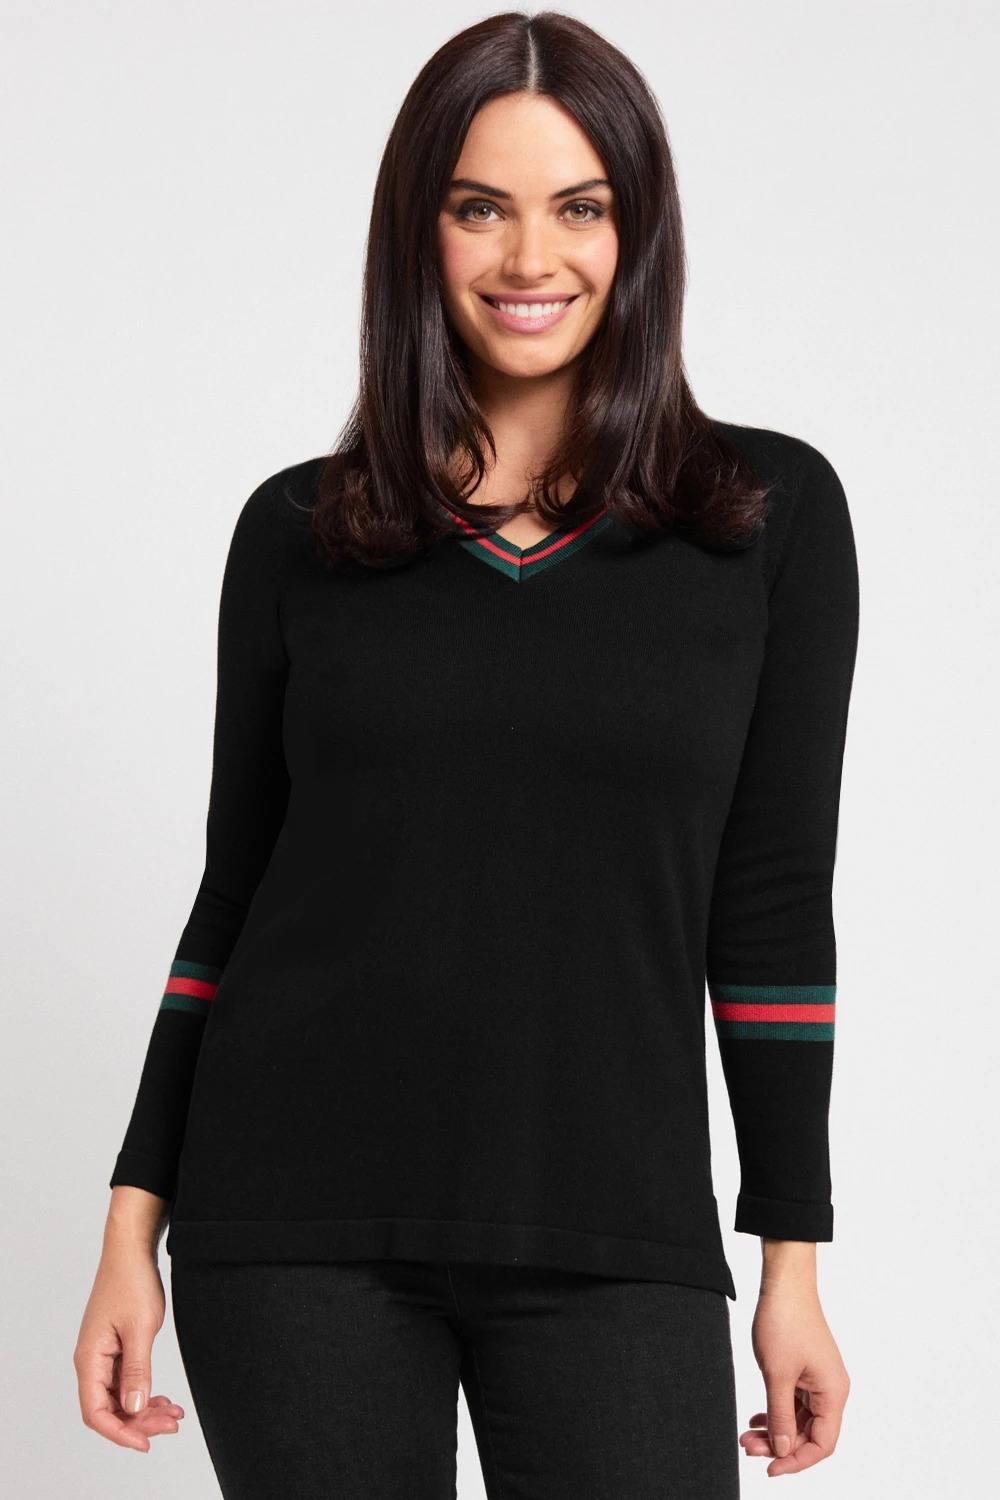 Peace of Cloth V-Neck Tipped Sweater in black at Village Vogue.